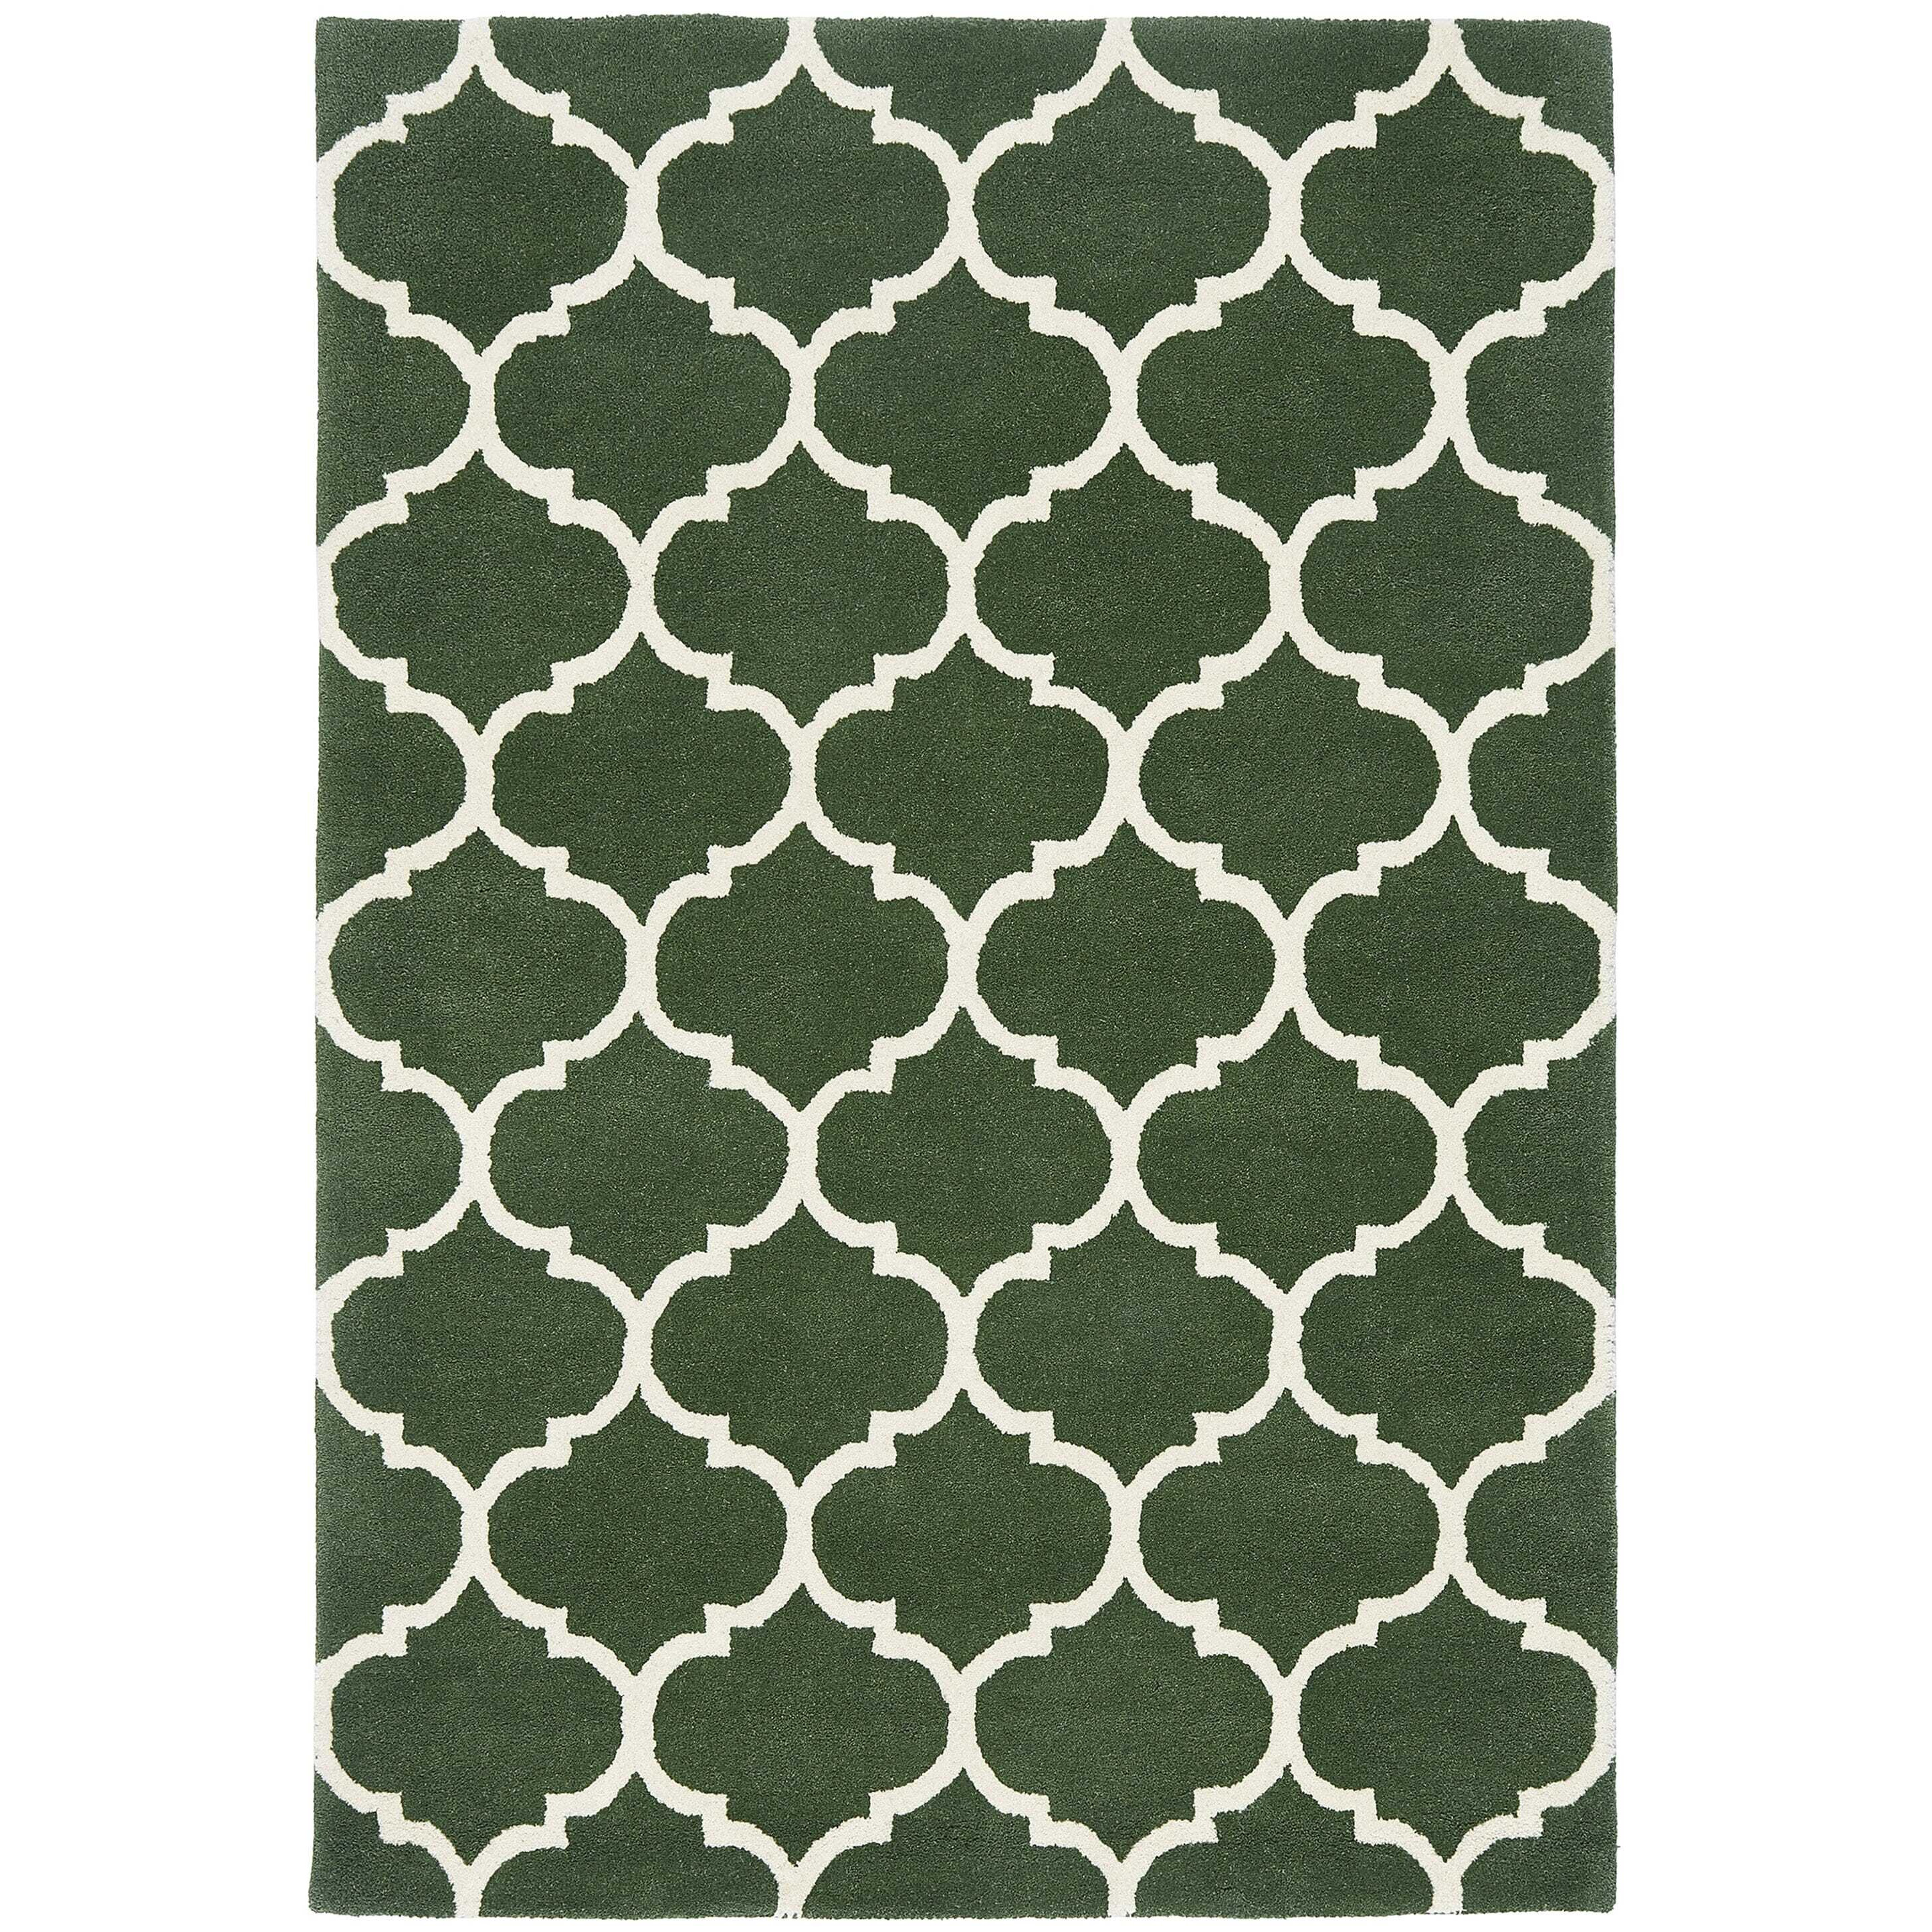 Asiatic Carpets Albany Handtufted Rug Ogee Green - 160 x 230cm - image 1